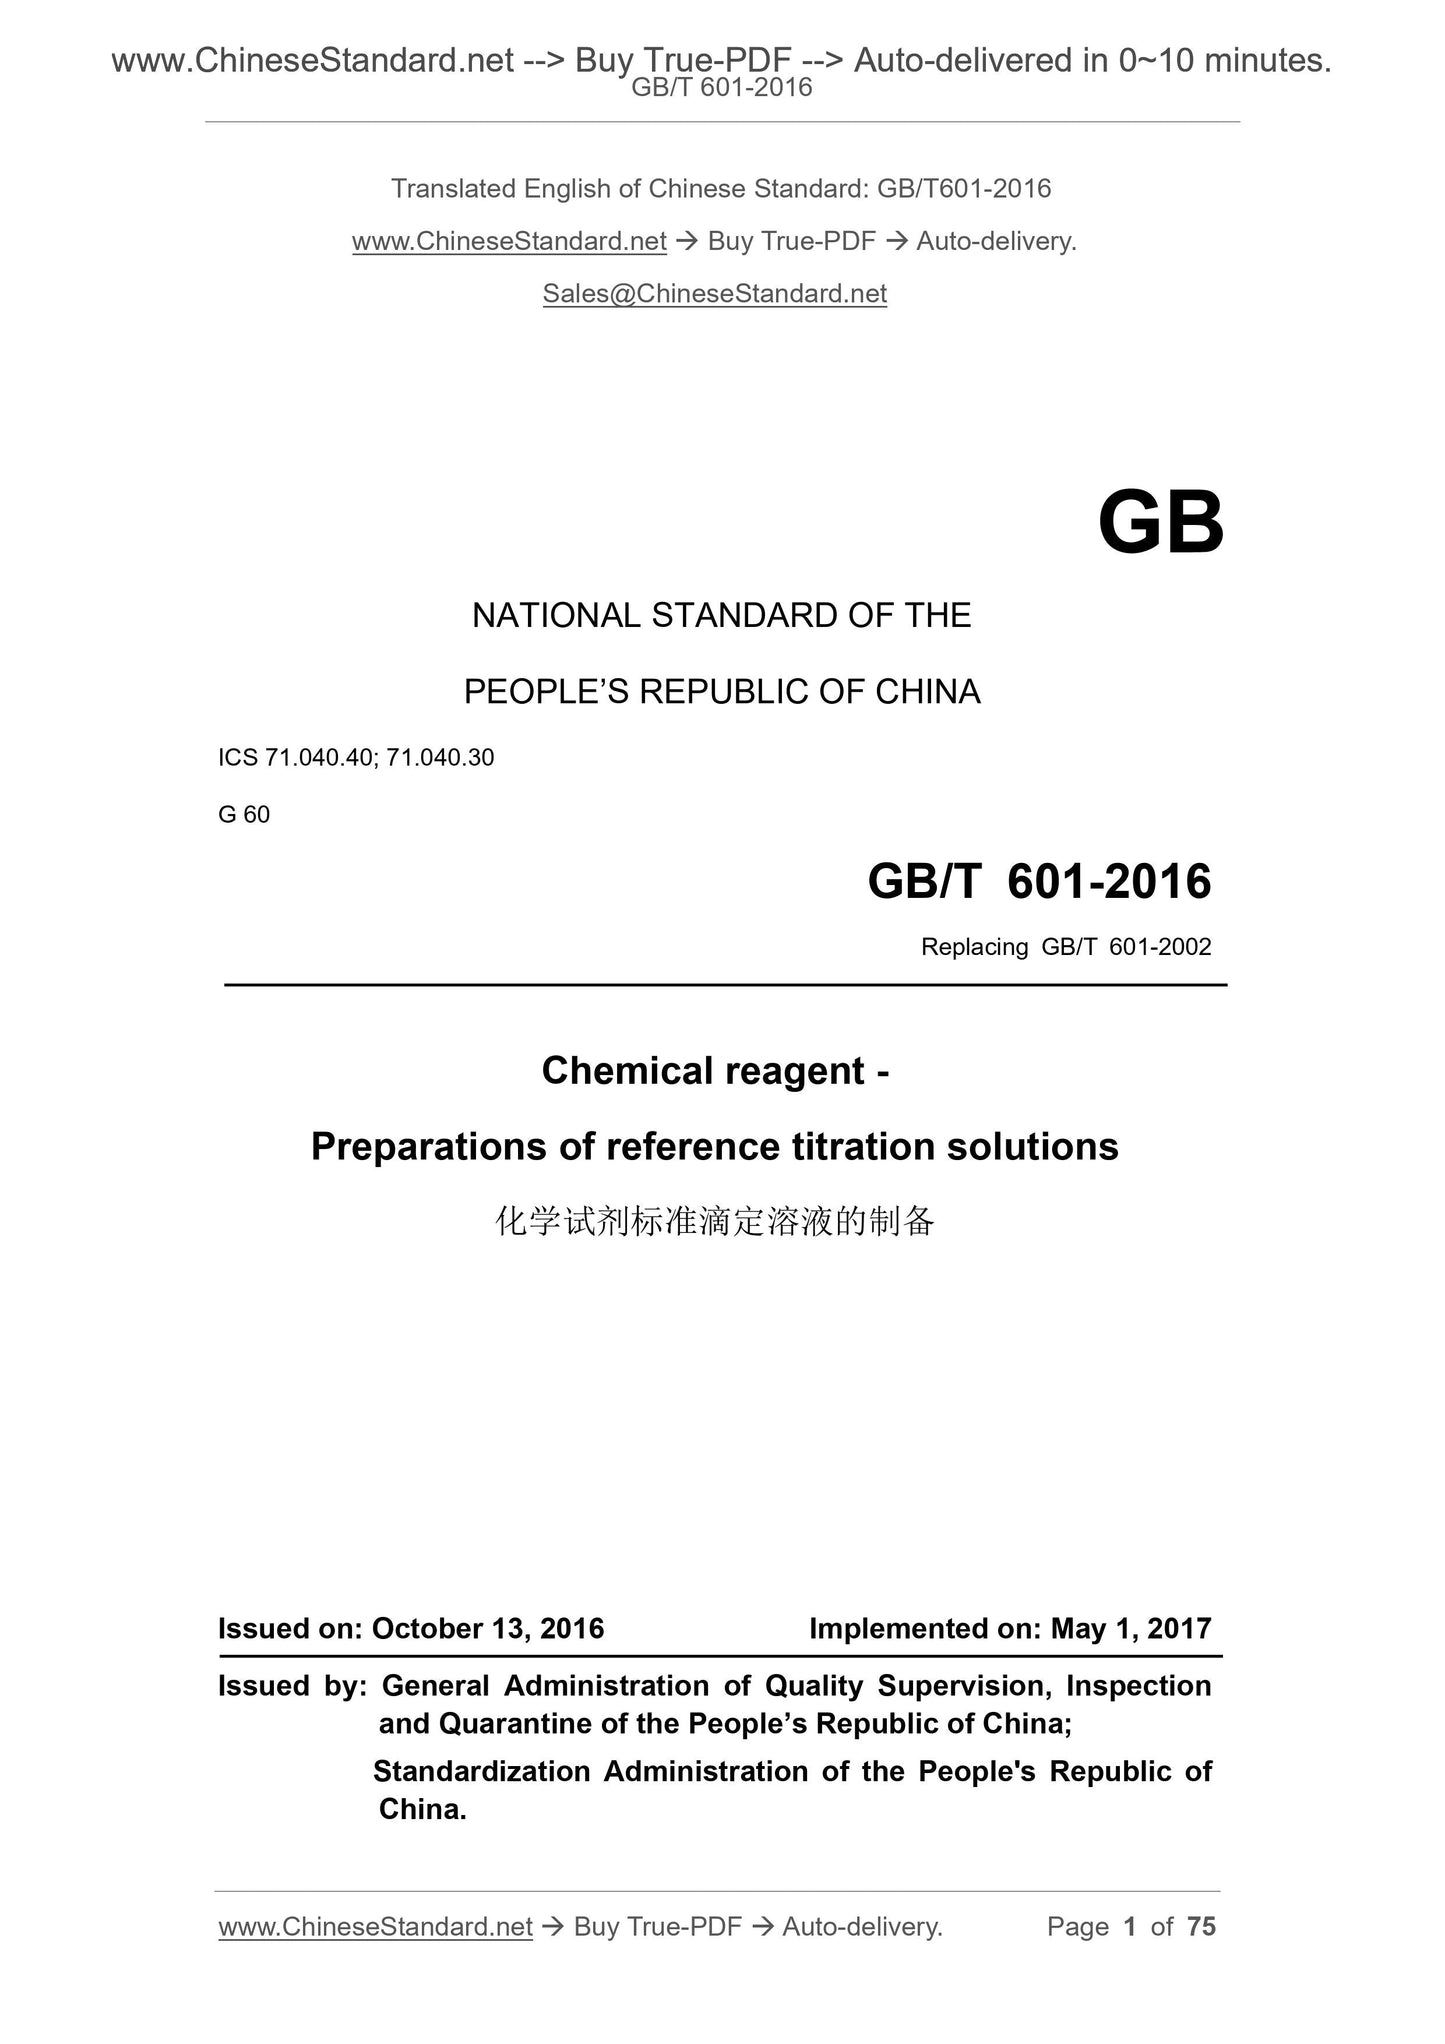 GB/T 601-2016 Page 1